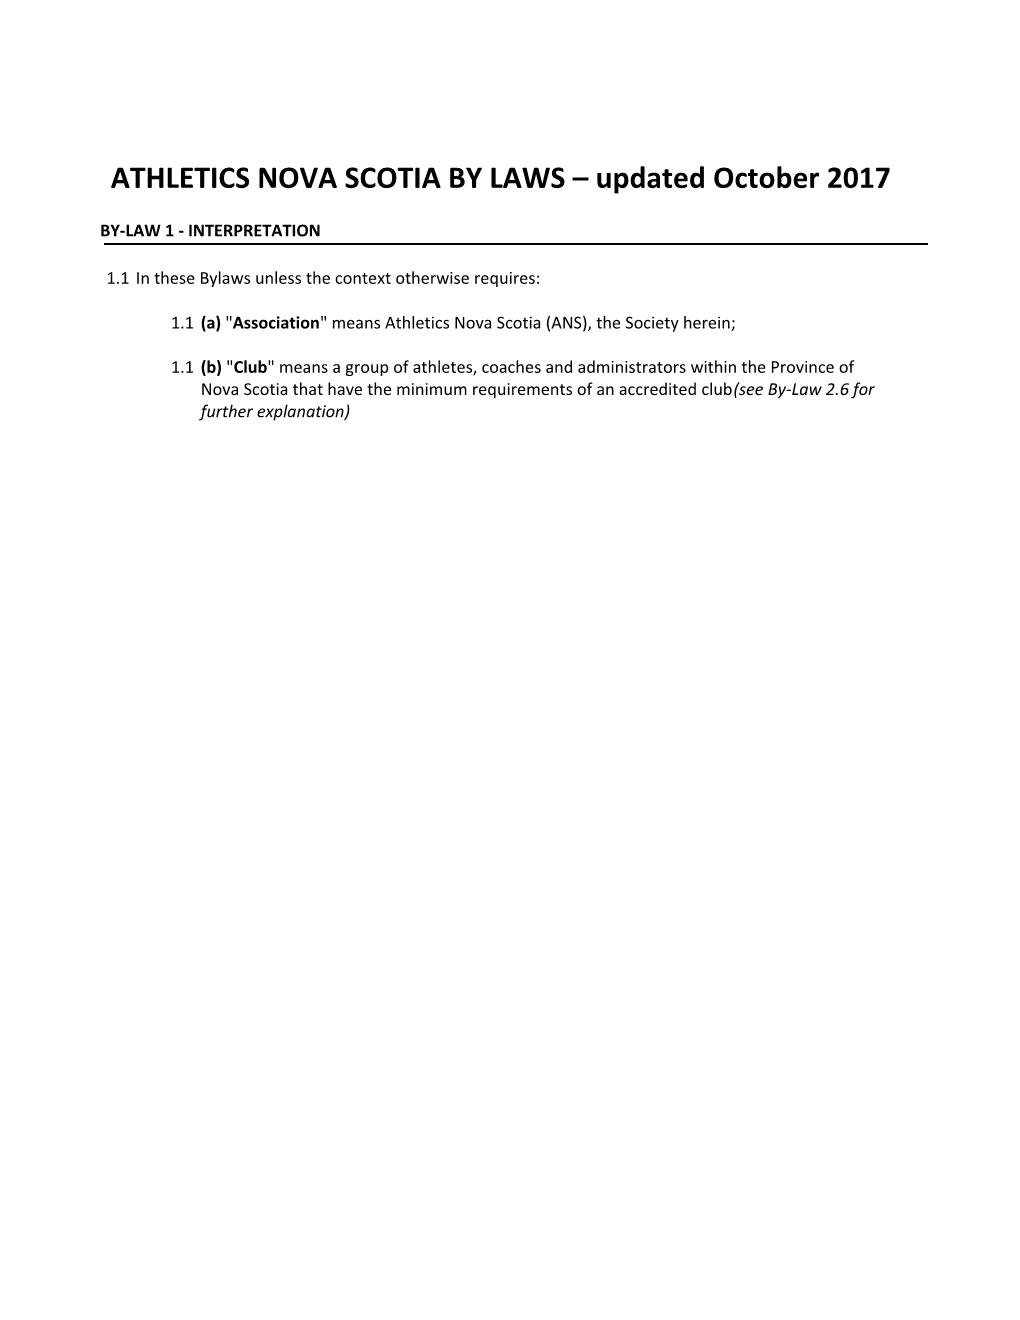 ATHLETICS NOVA SCOTIA by LAWS Updated October 2017